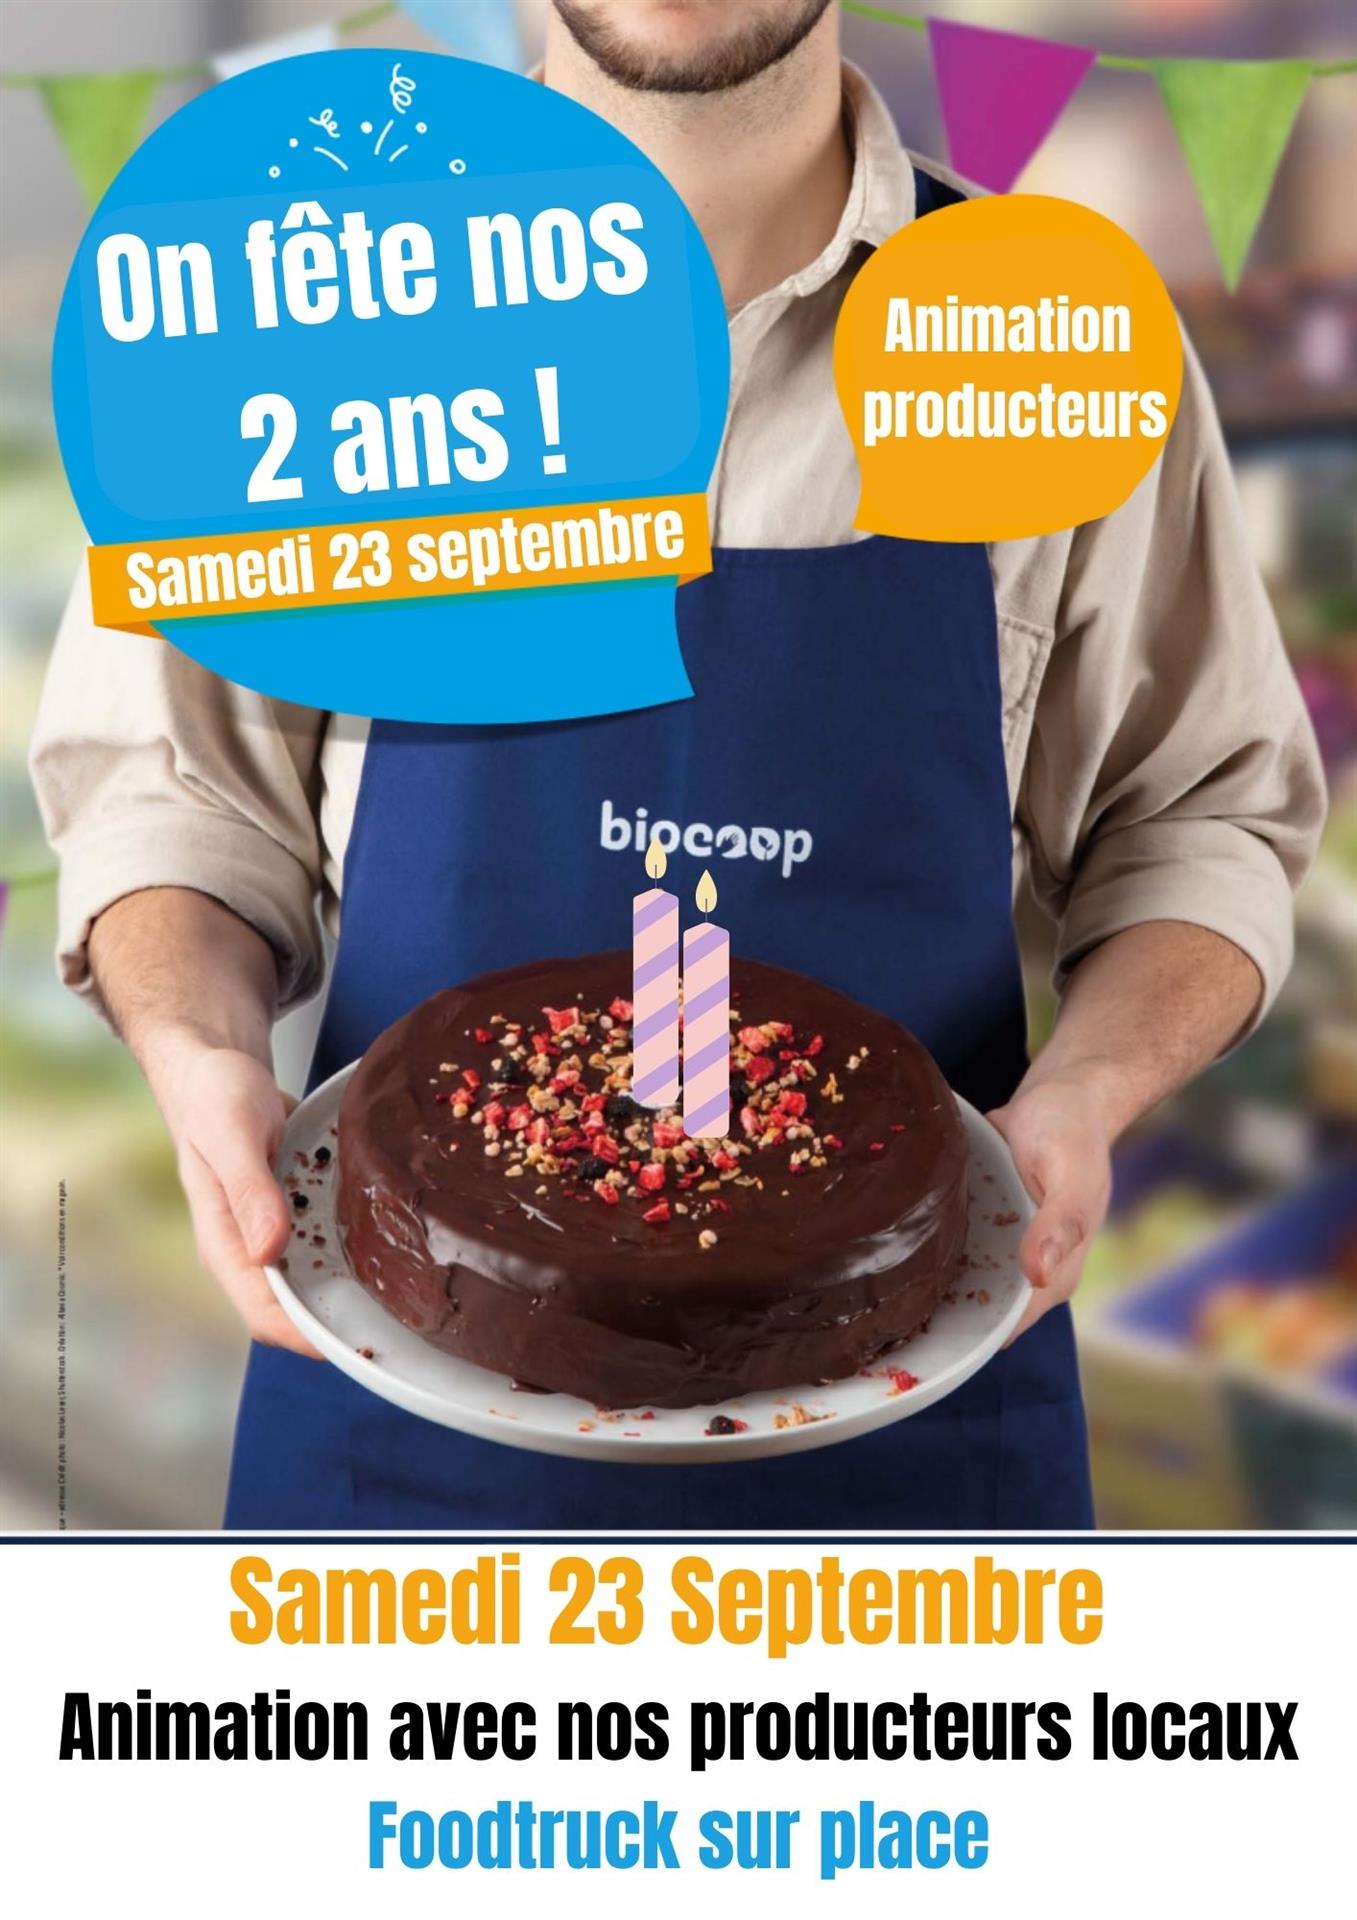 ANNIVERSAIRE MAGASIN : ANIMATIONS PRODUCTEURS